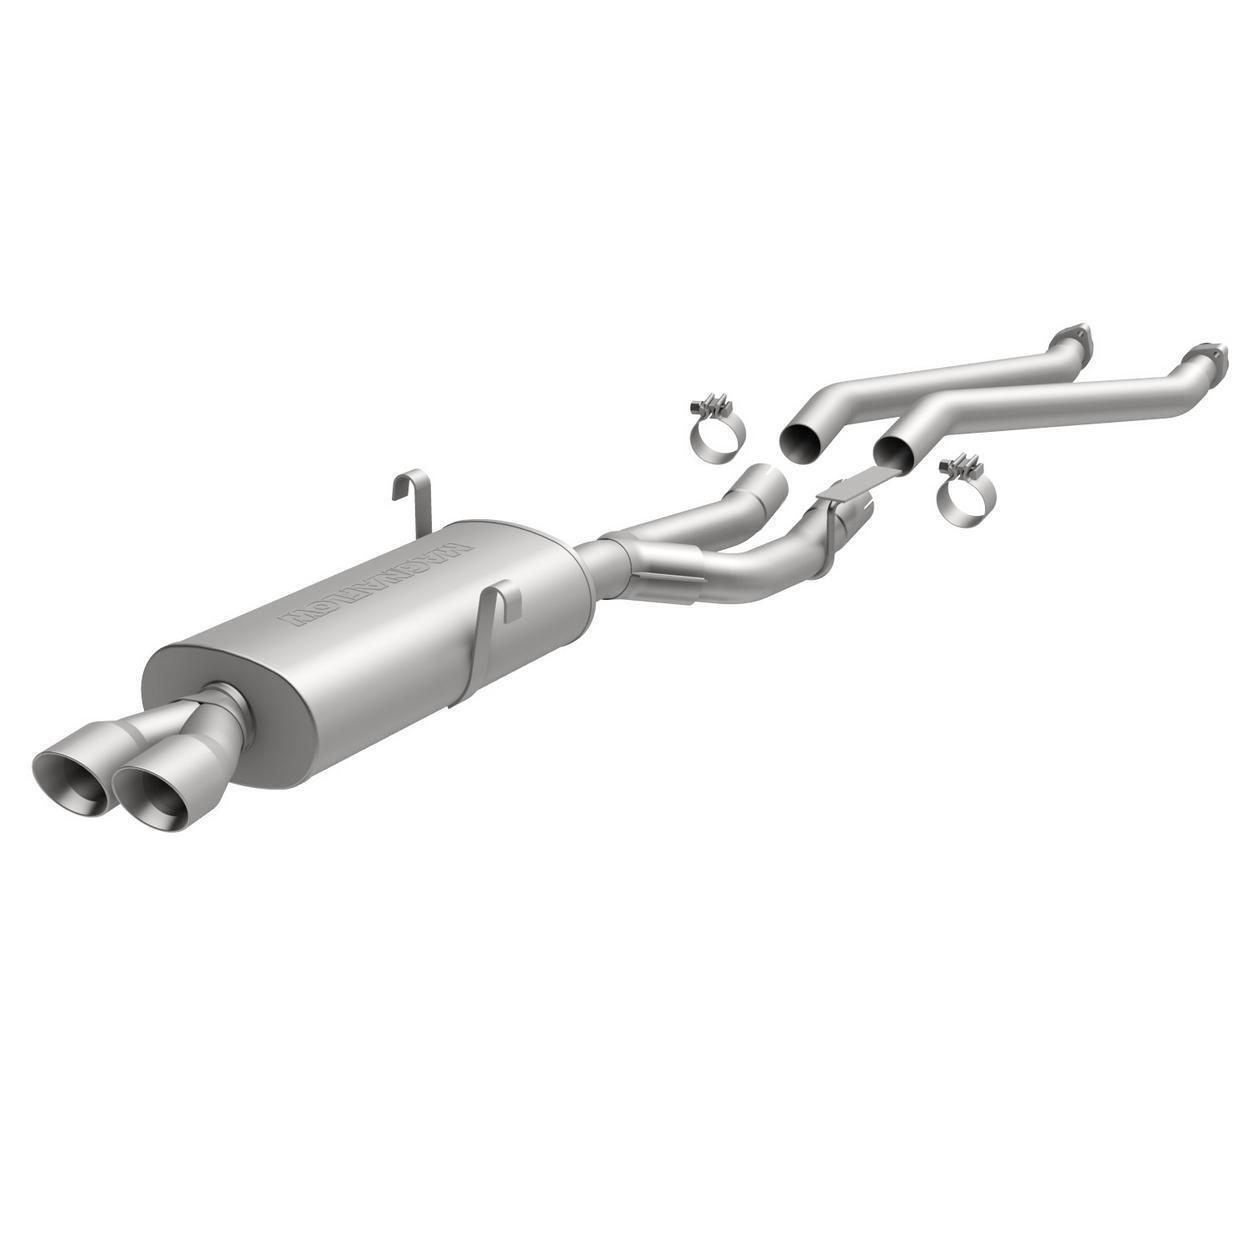 MagnaFlow 16535-AN Fits 1991 BMW 325is Exhaust System Kit